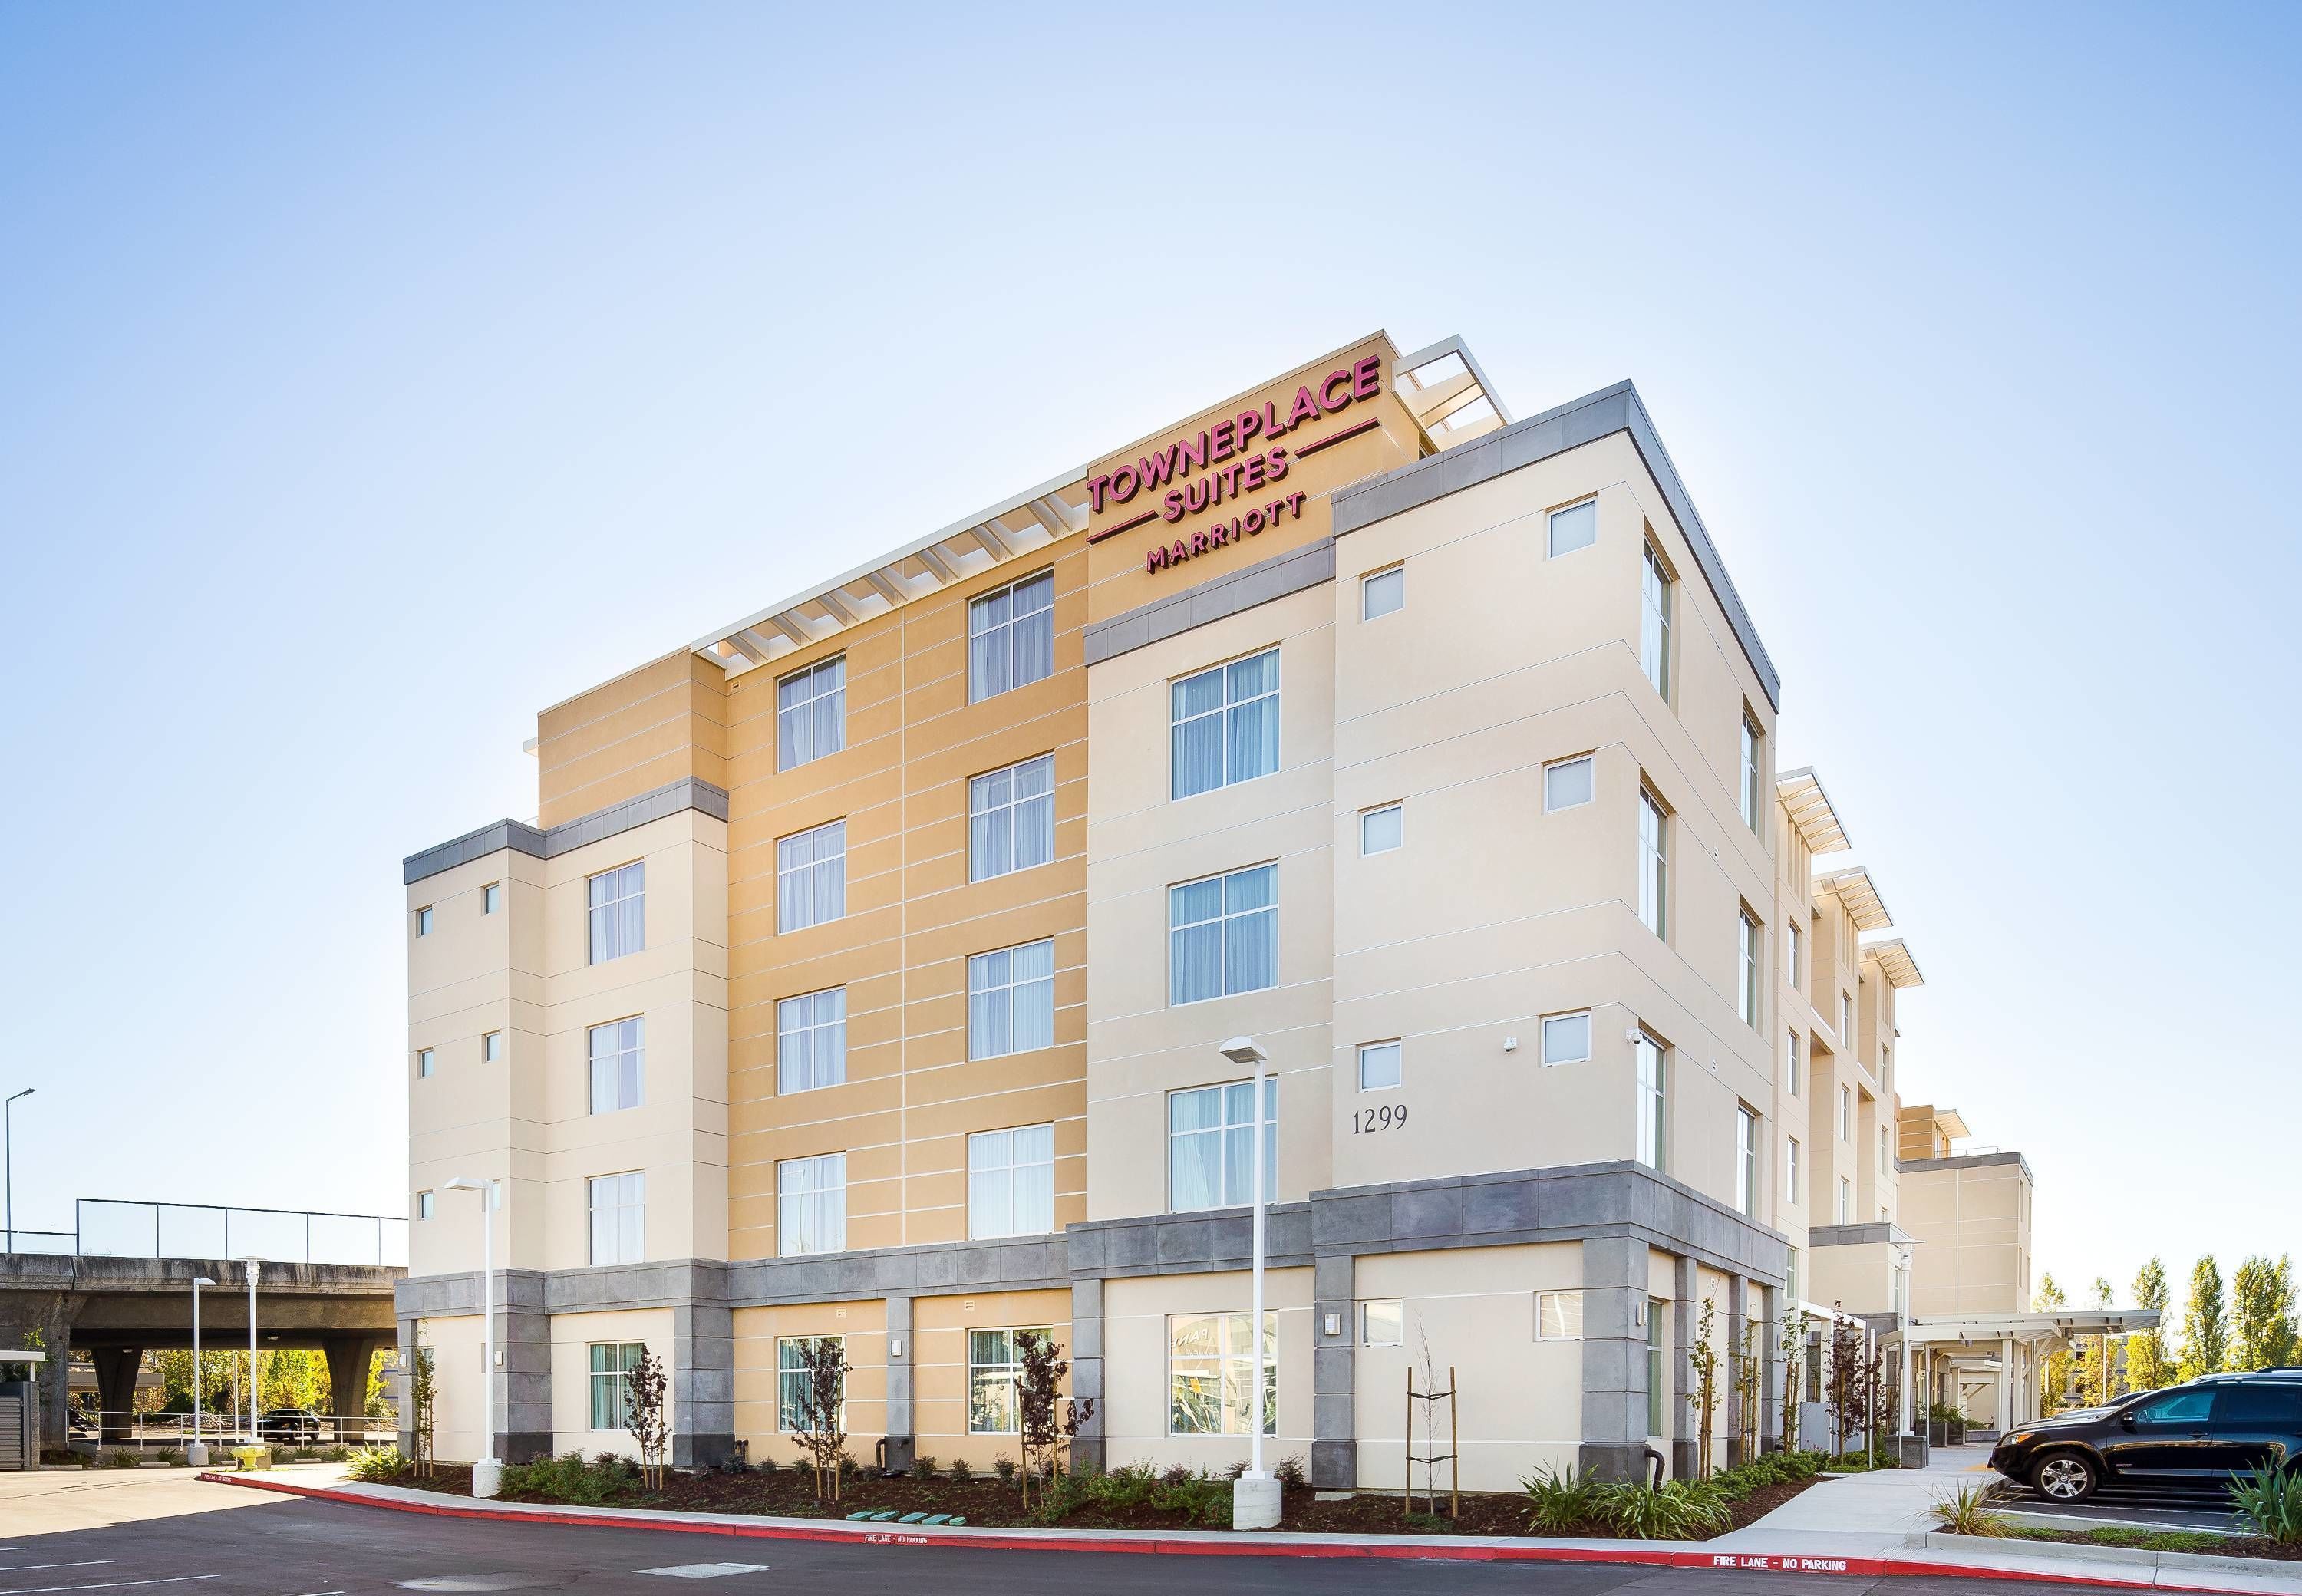 TownePlace Suites by Marriott San Mateo Foster City image 1